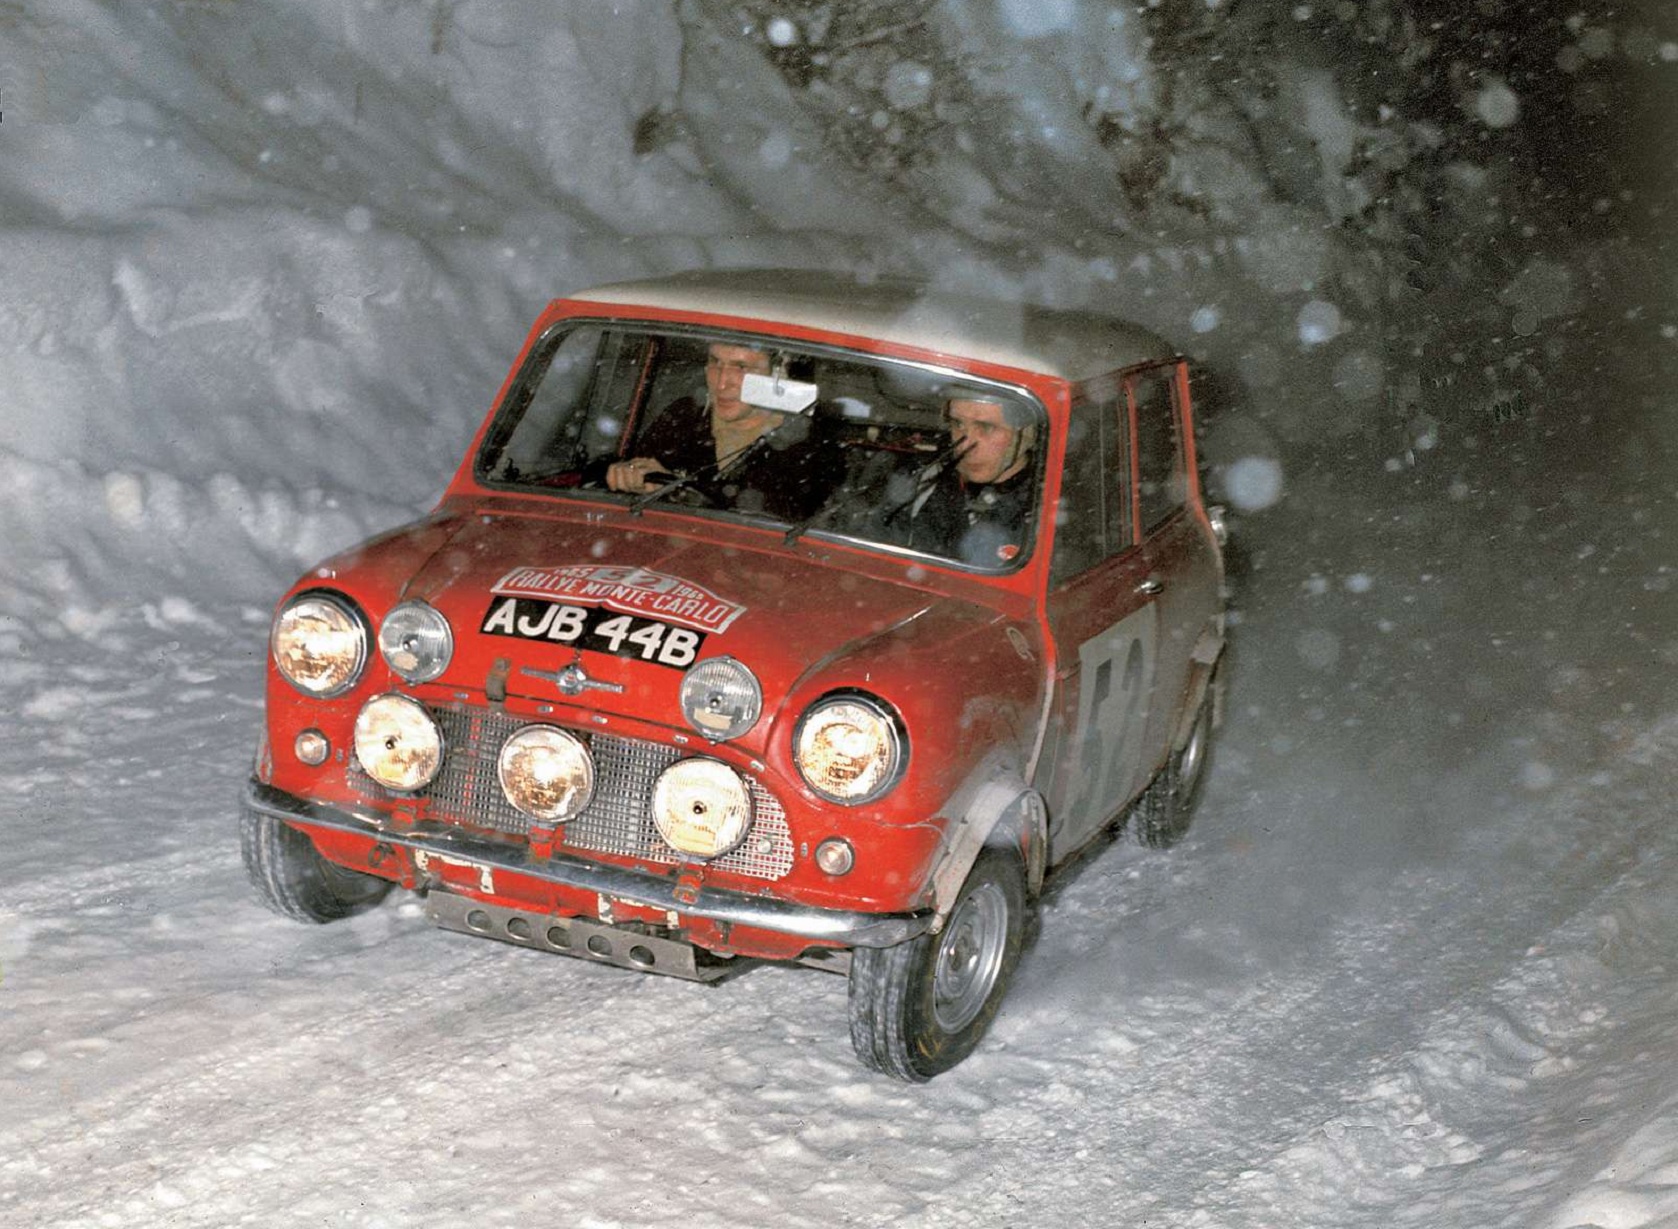 Red 1965 Mini Cooper S racing in the snow at Monte Carlo